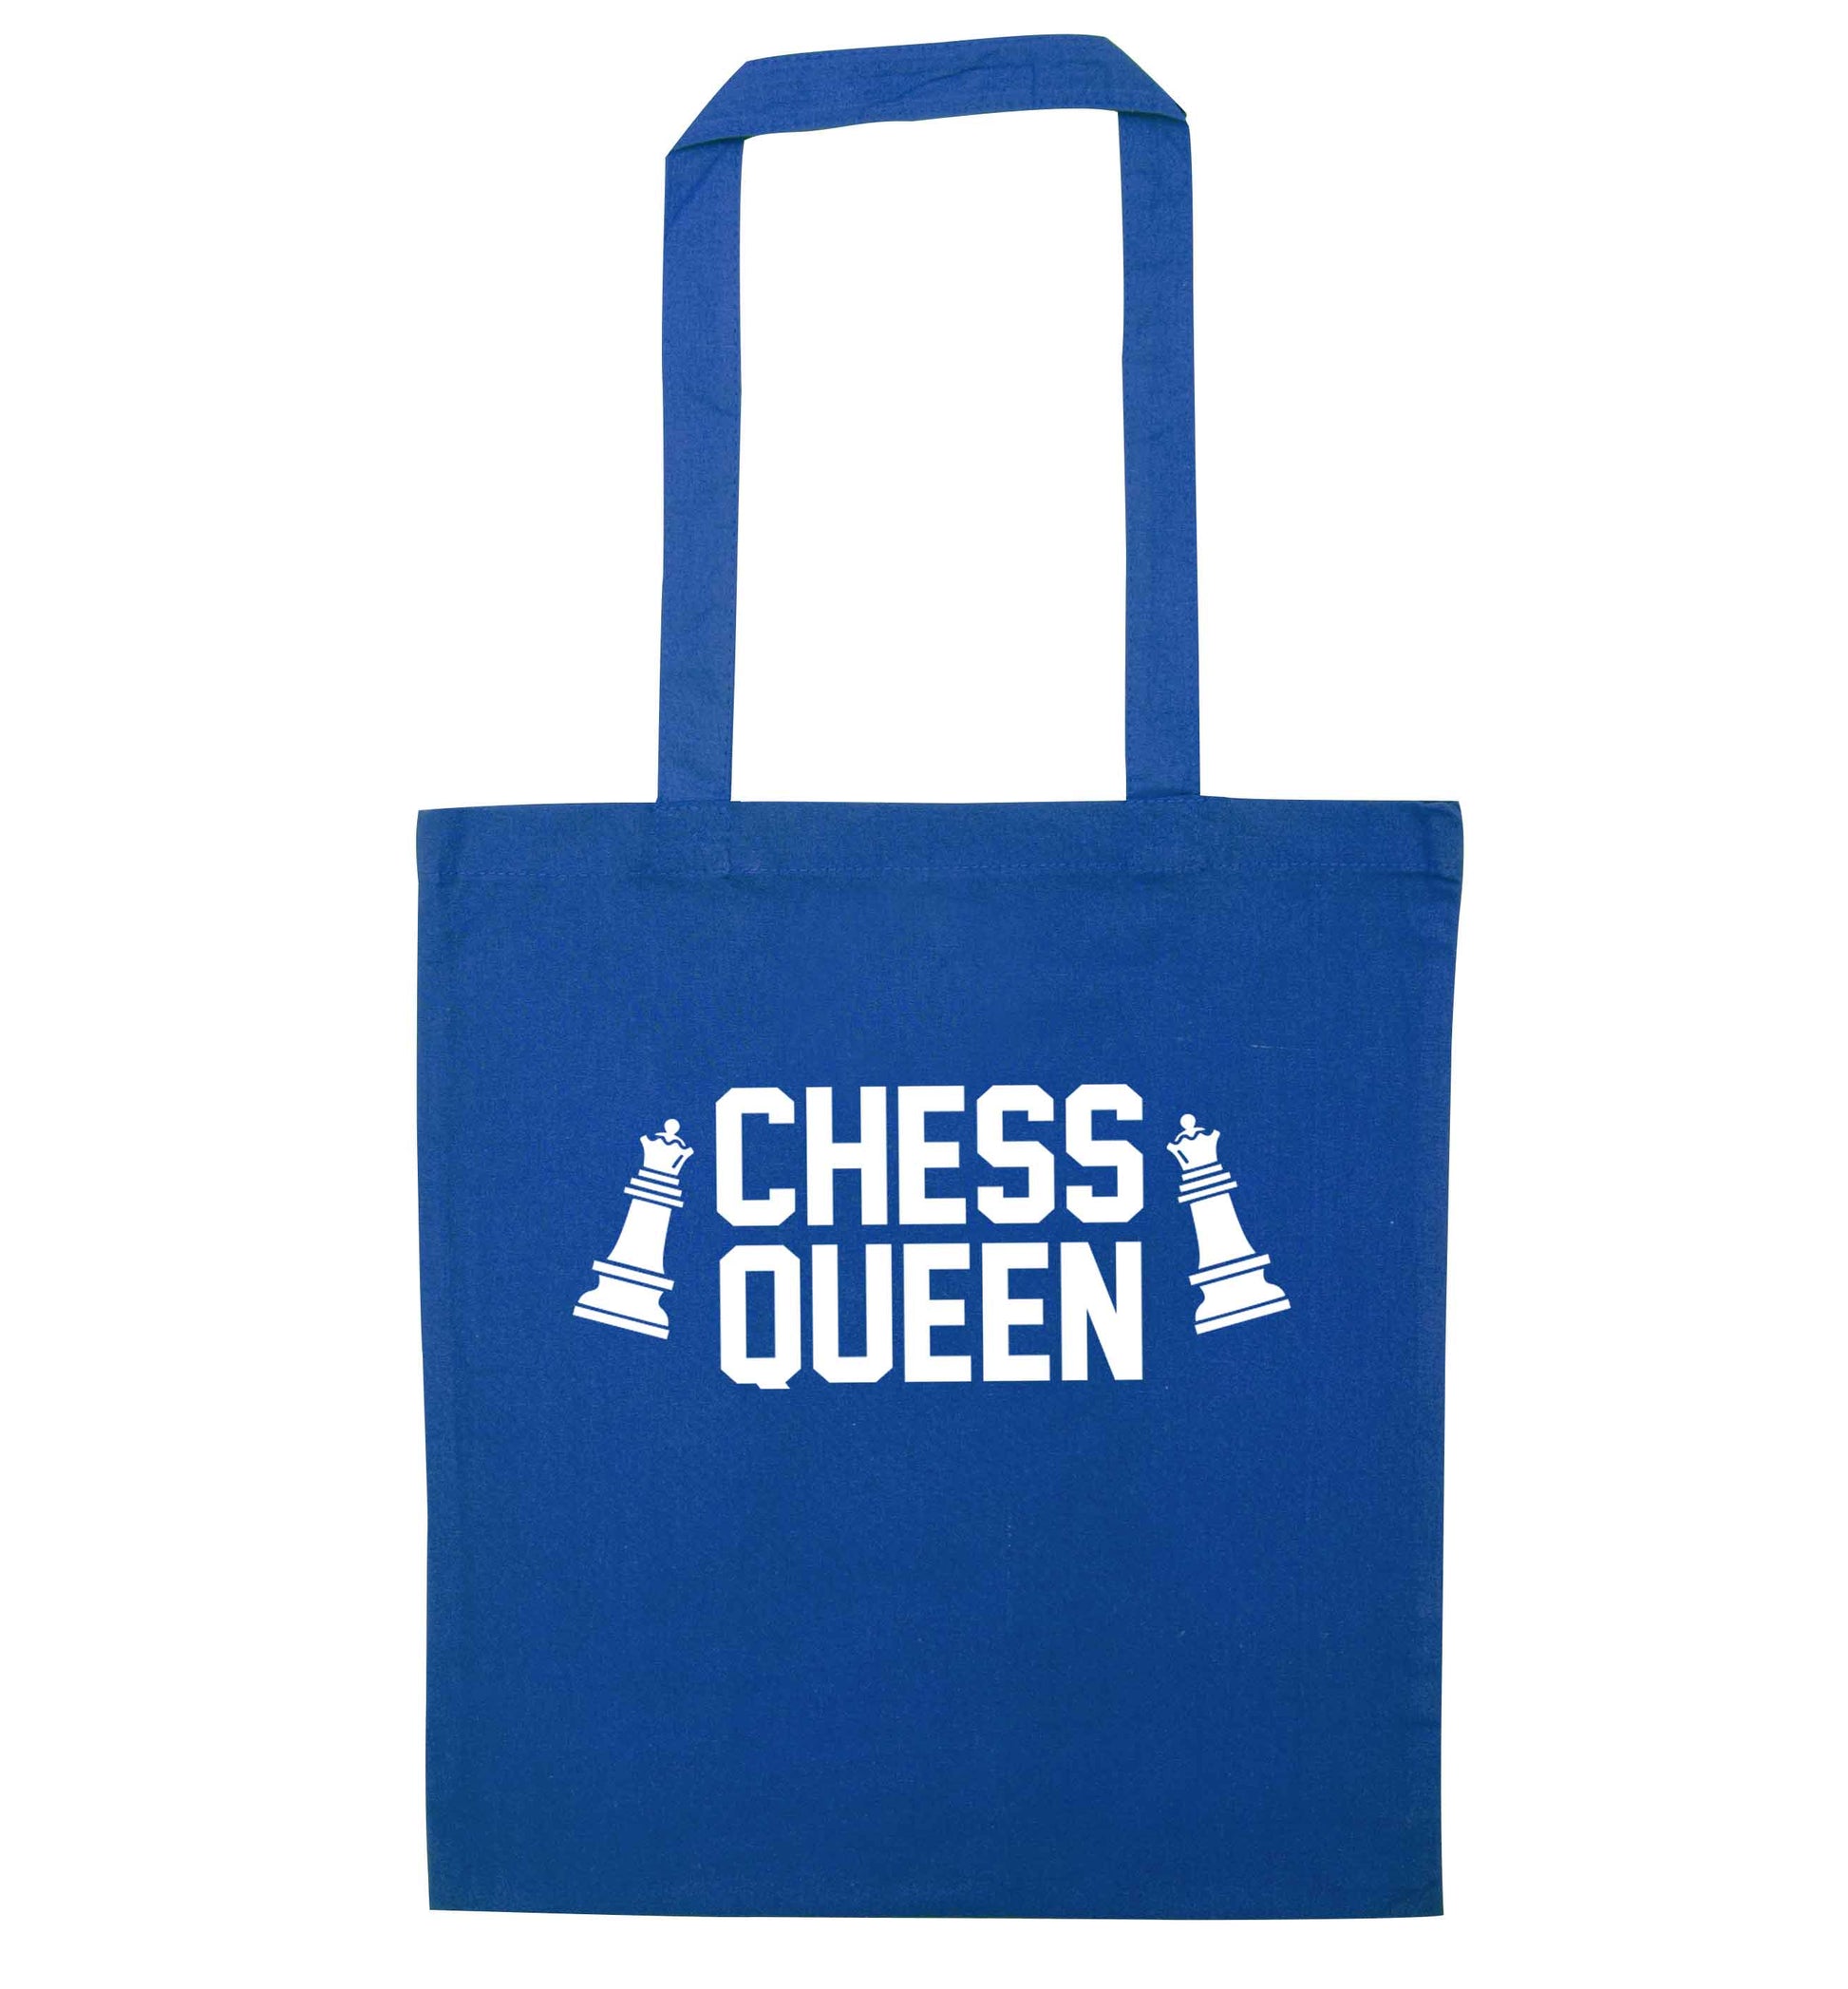 Chess queen blue tote bag